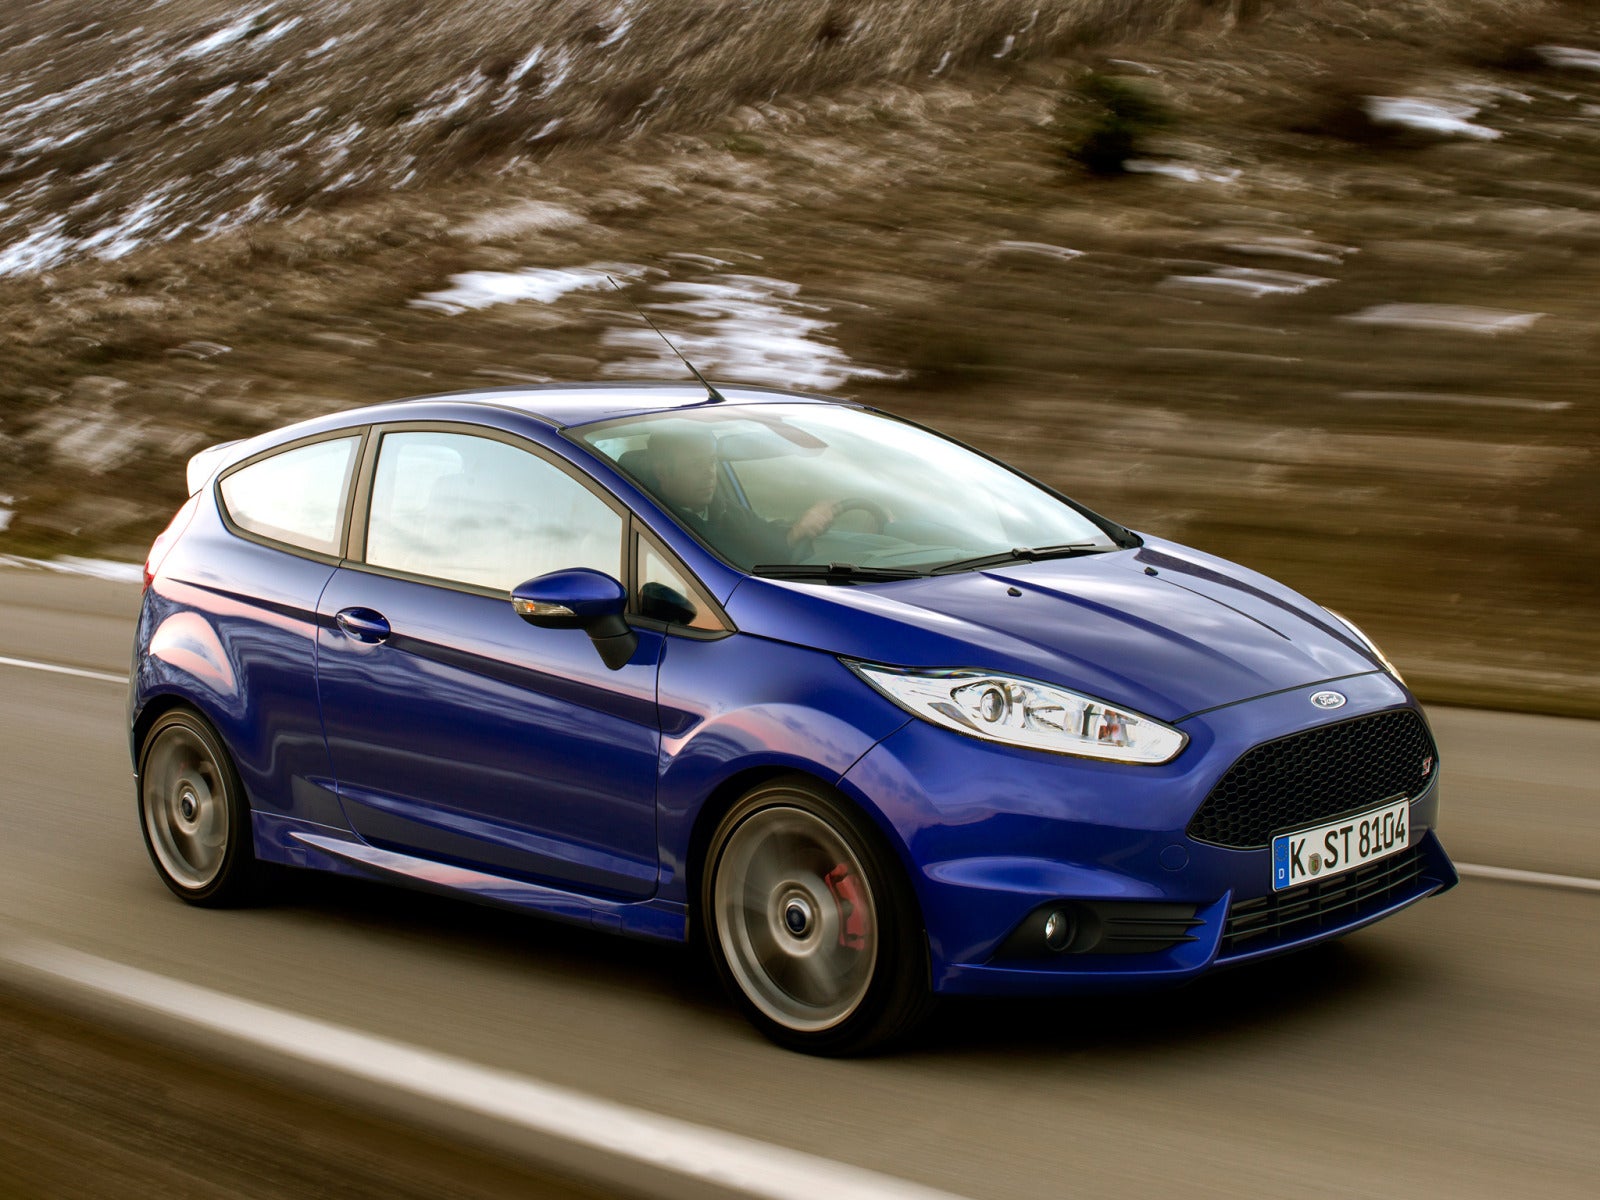 Jeremy clarkson ford focus st review #1